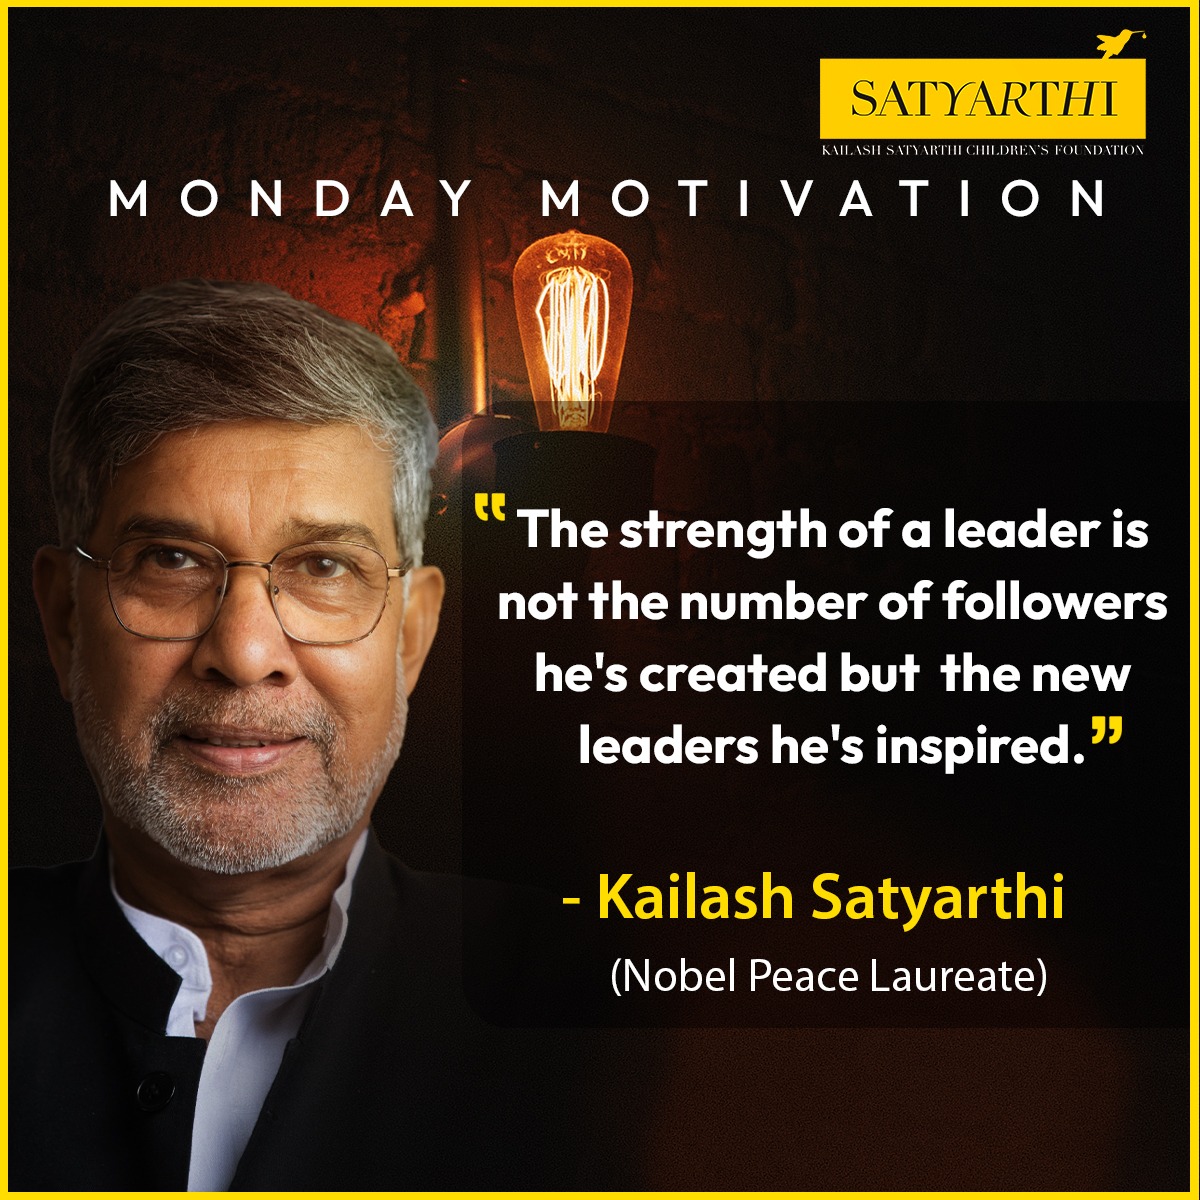 When a leader ignites young minds and makes them question the unjust around them, wind of change begins to blow.
.
#KailashSatyarthi #ChildRights #EveryChildMatters #ChildWelfare #EducationForAll #ChildhoodLessons #MondayMotivation